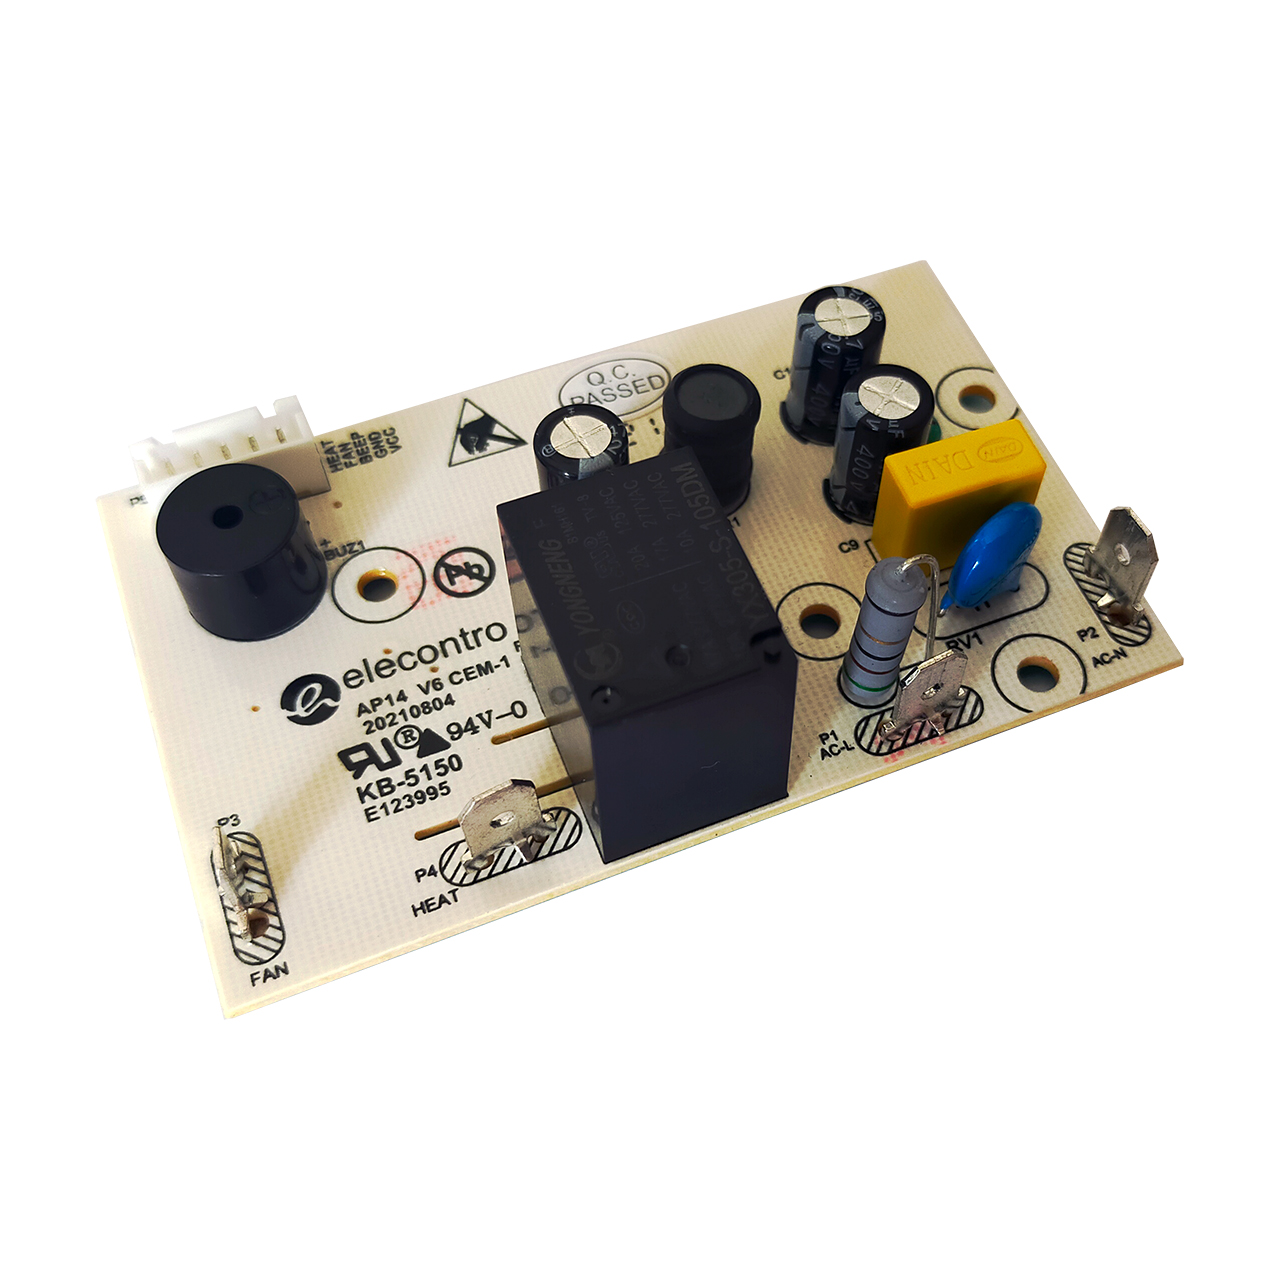 5 button touch air fryer control board